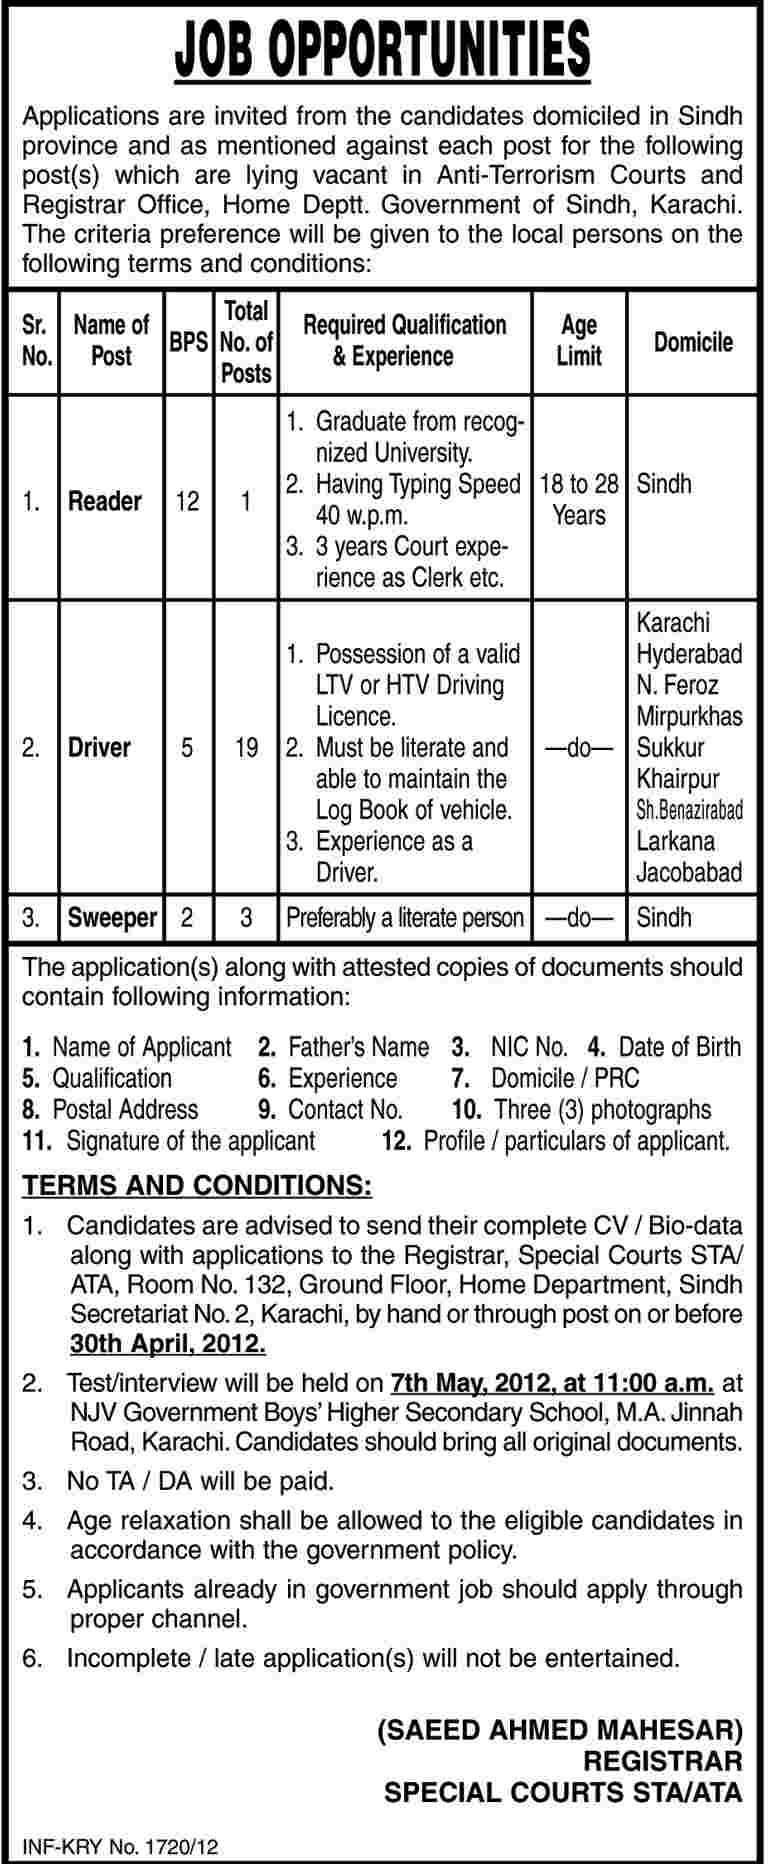 Anti-Terrorism Court and Registrar Office, Home Department Govt. of Sindh Jobs